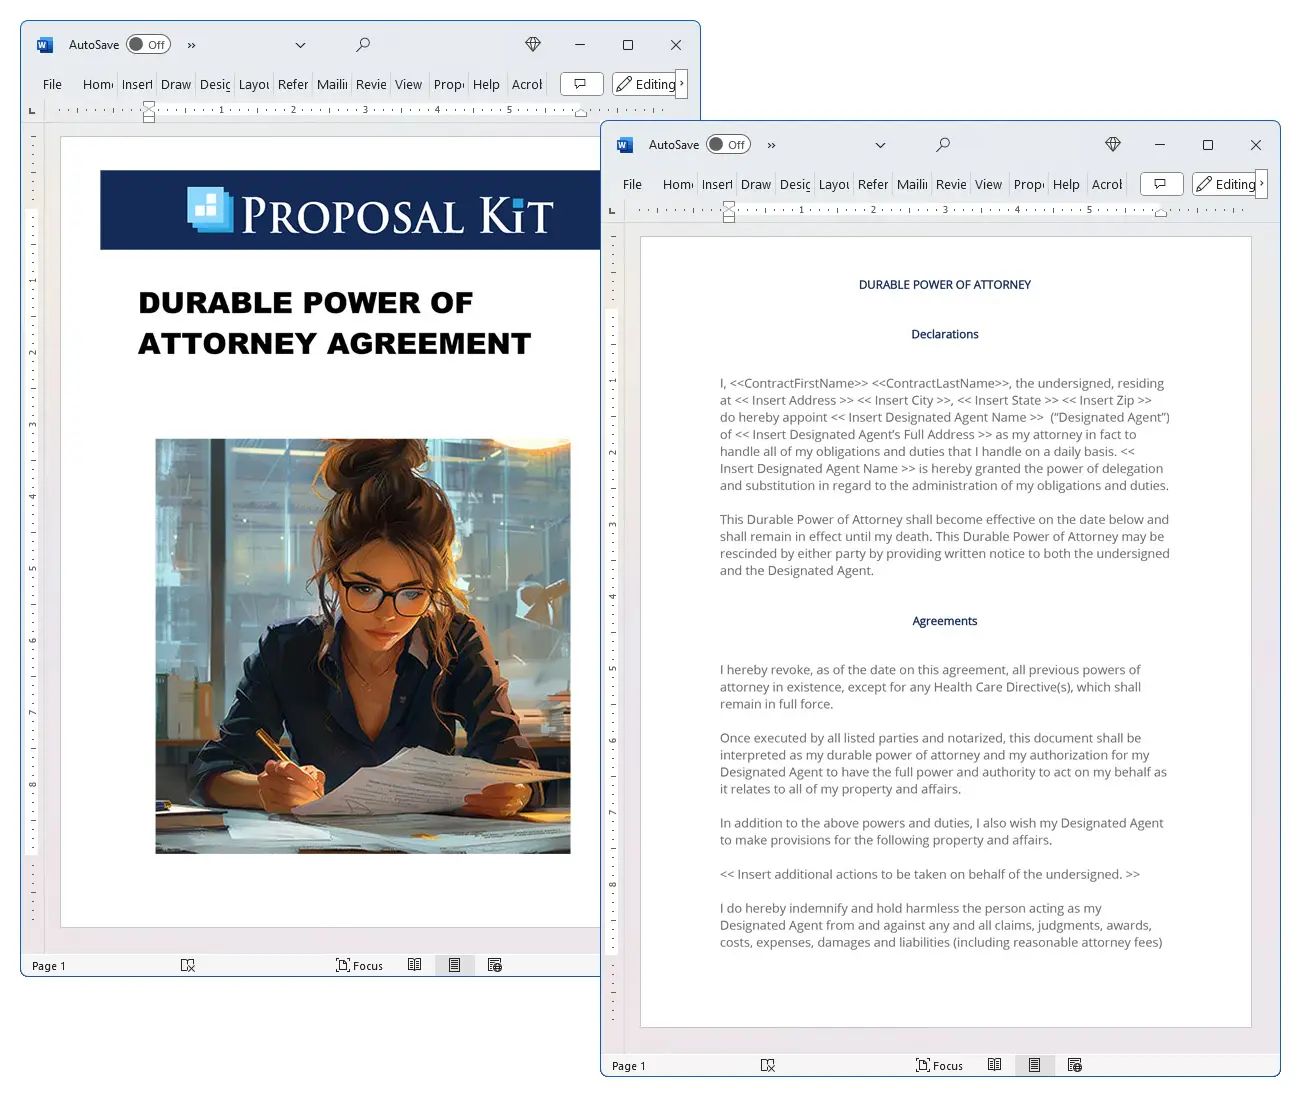 Durable Power of Attorney Agreement Concepts